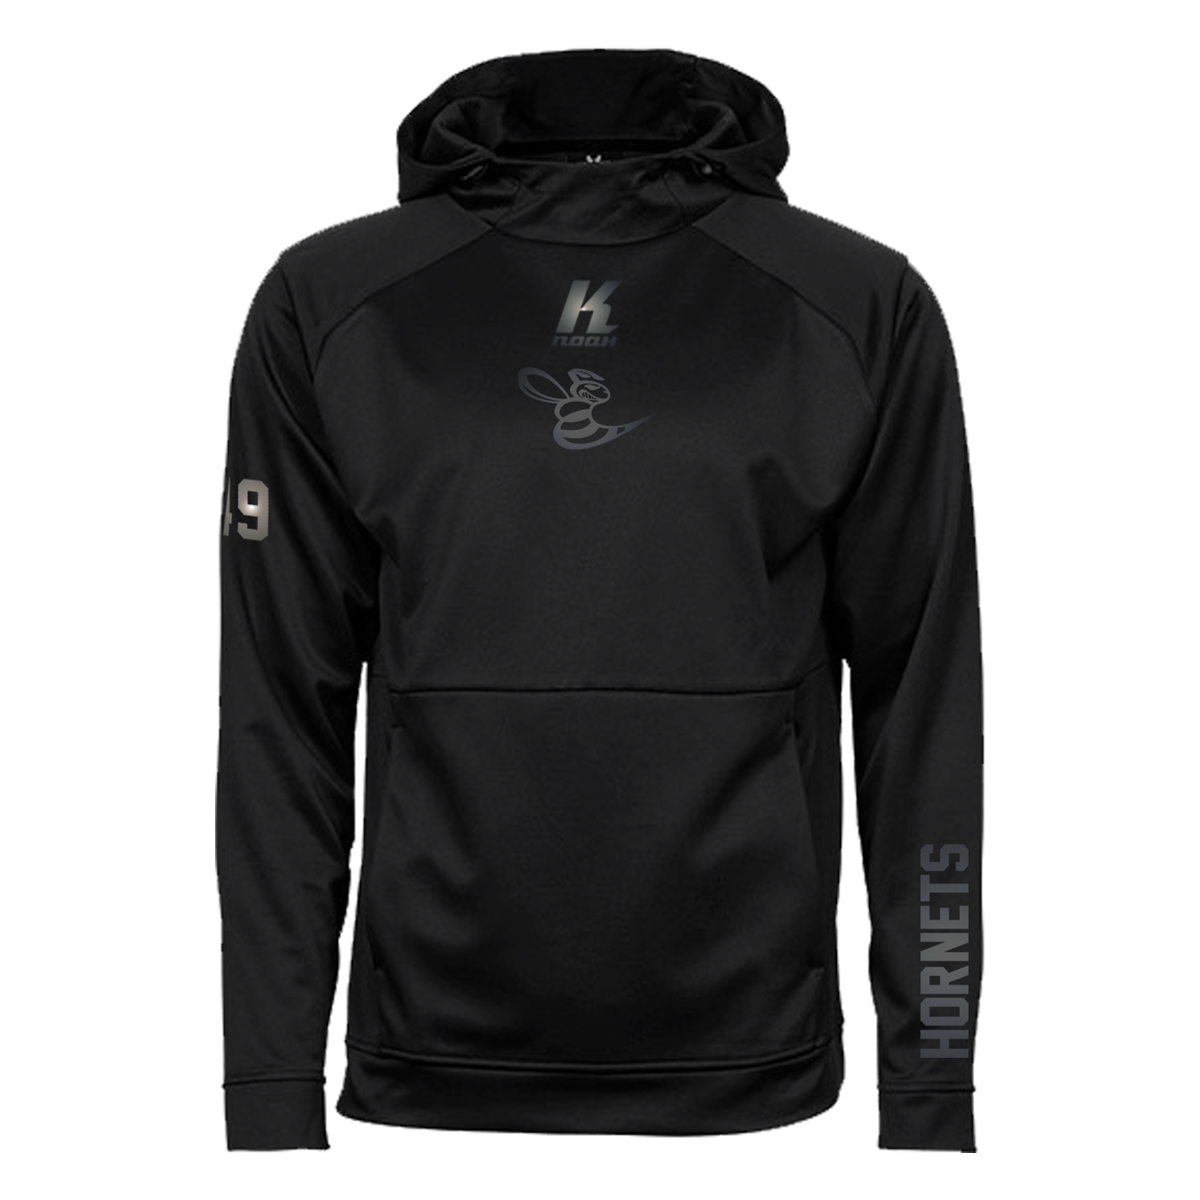 Hornets "Blackline" Performance Hoodie JH006 with Playernumber or Initials